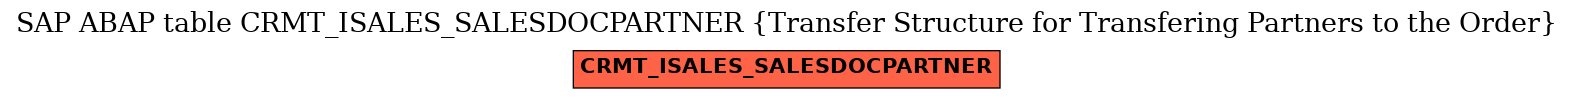 E-R Diagram for table CRMT_ISALES_SALESDOCPARTNER (Transfer Structure for Transfering Partners to the Order)